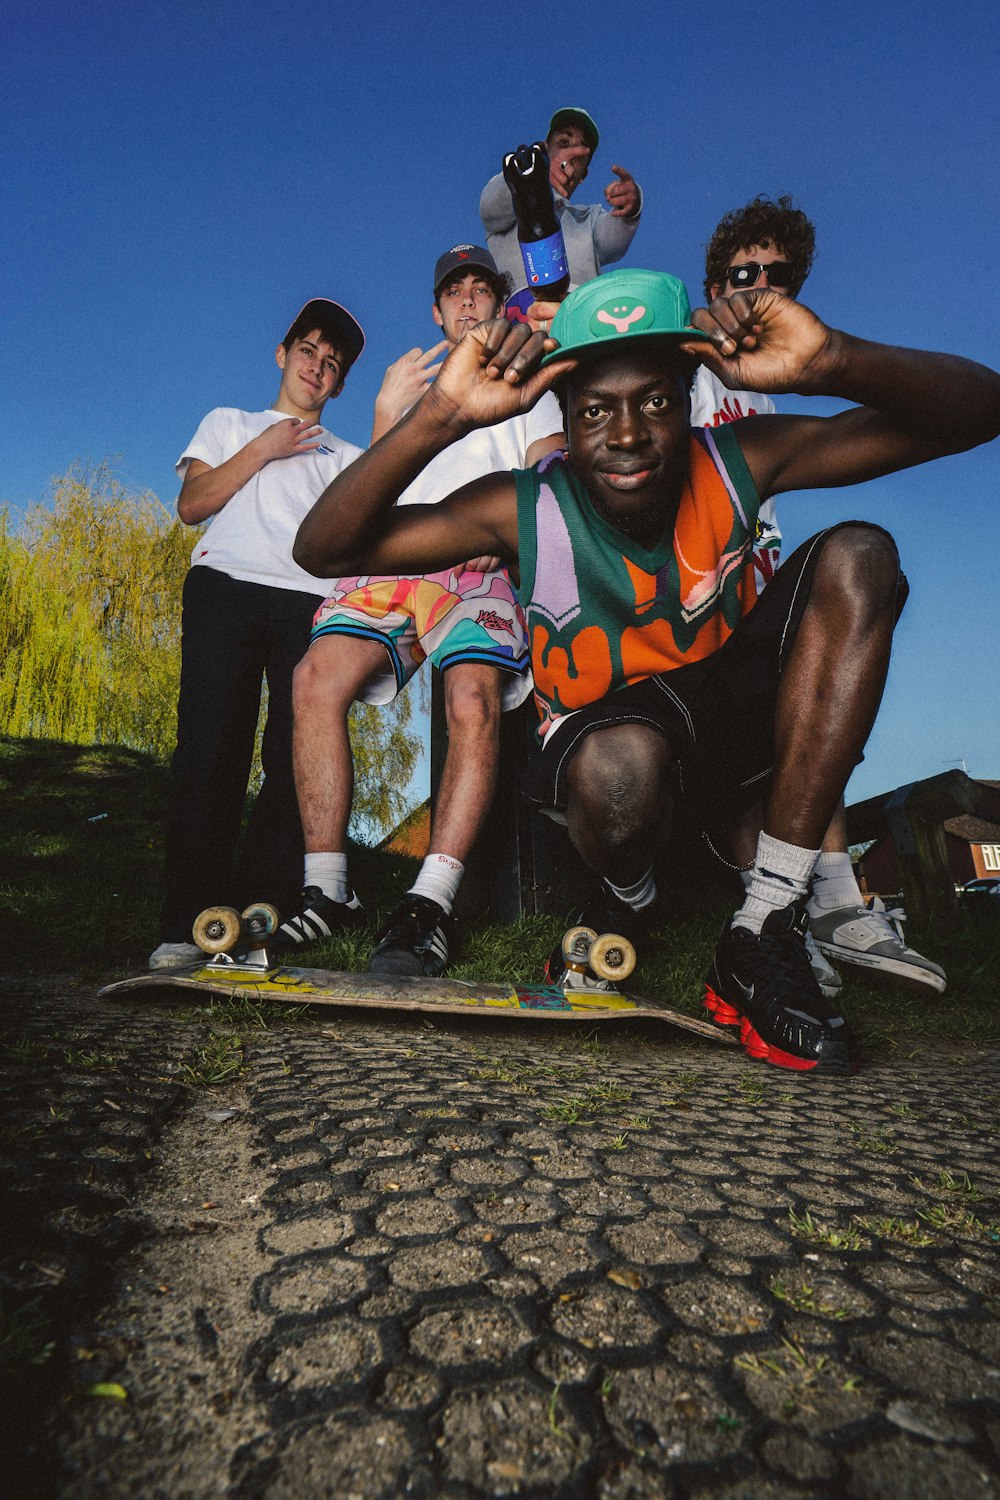 a group of young men sitting on top of a skateboard